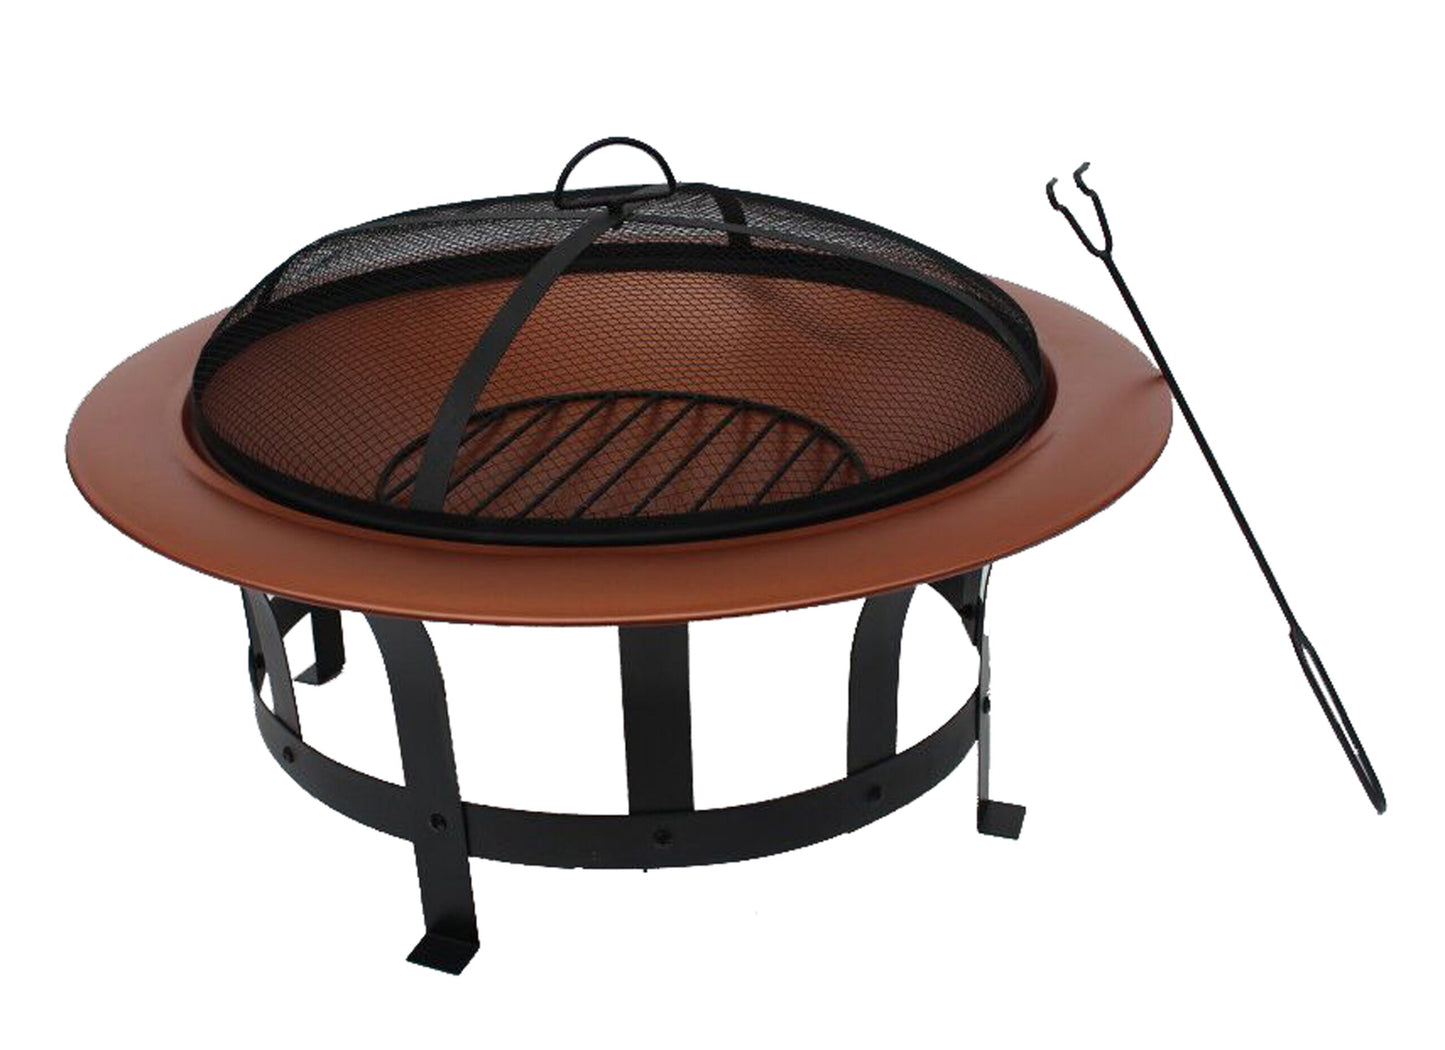 Nicole Miller Patio 30 Inch Wood-Burning Fire Pit in Copper Finish